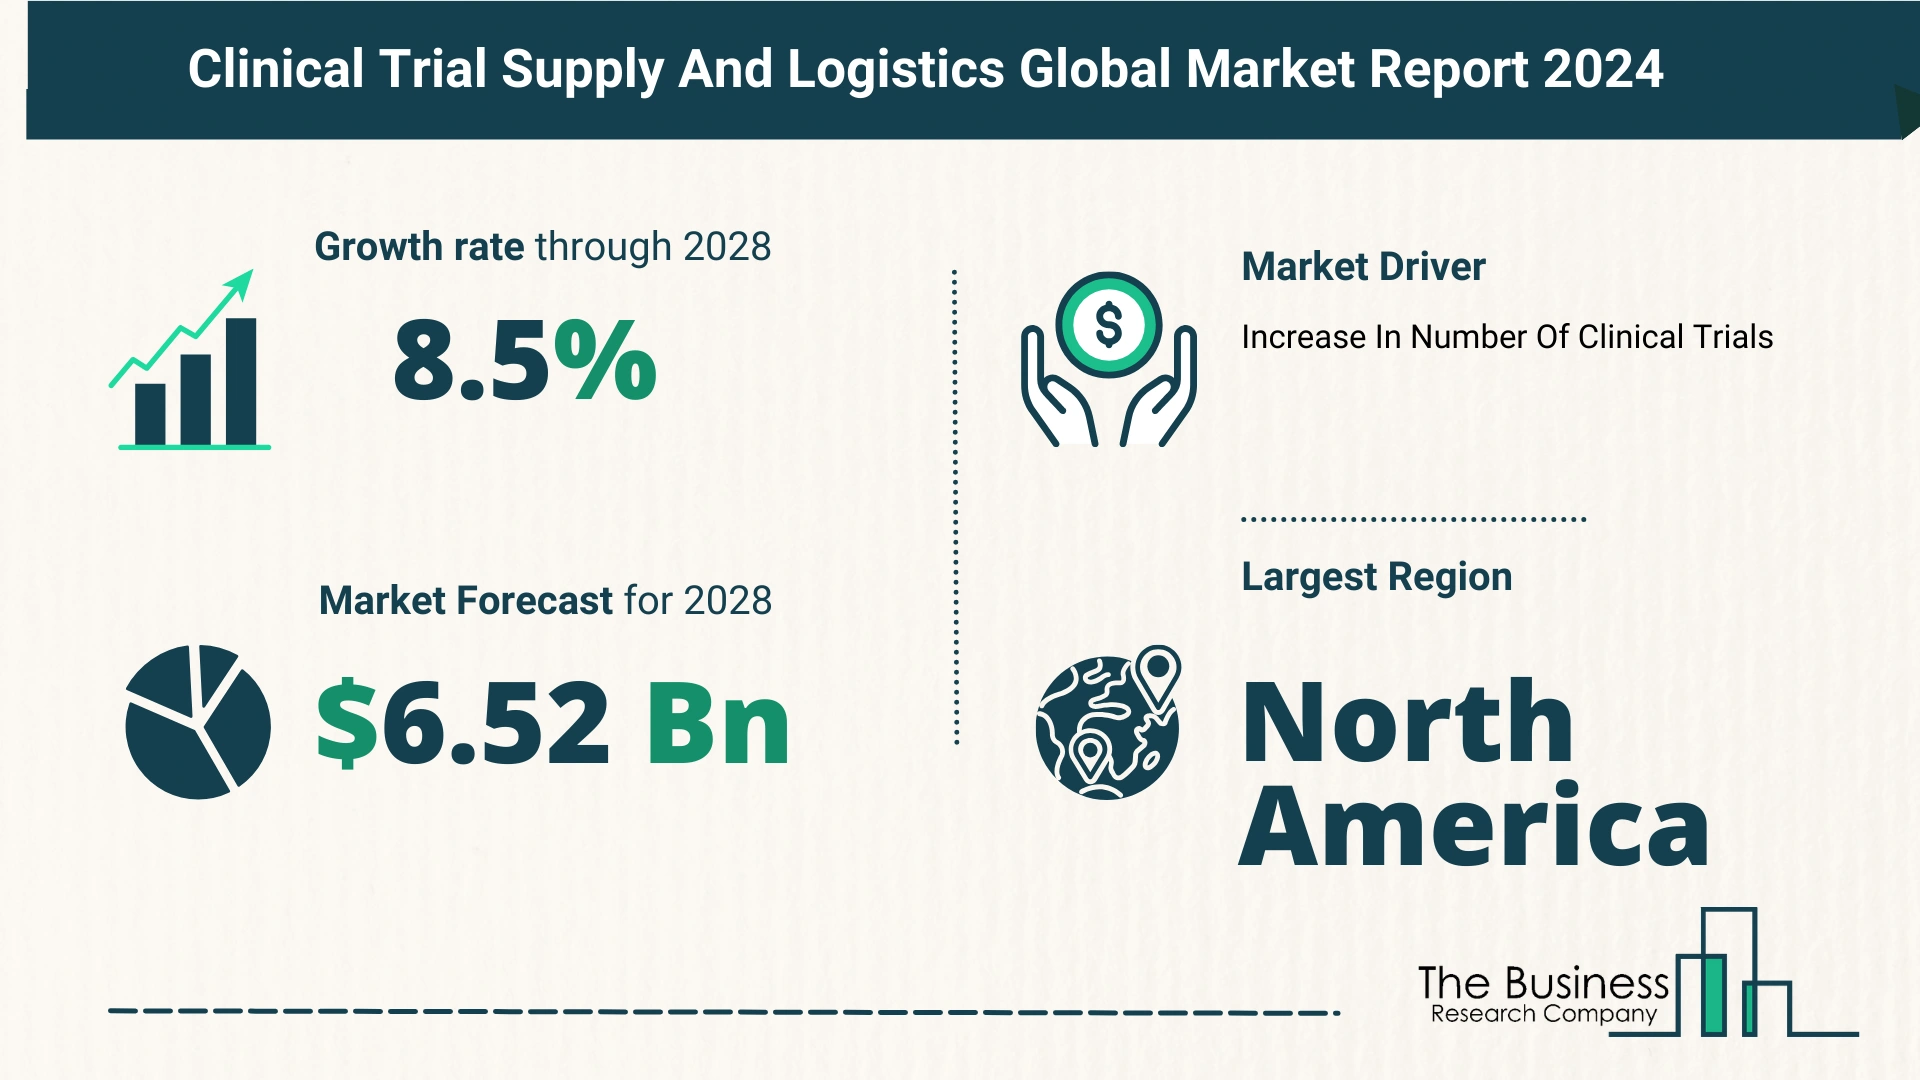 Global Clinical Trial Supply And Logistics Market